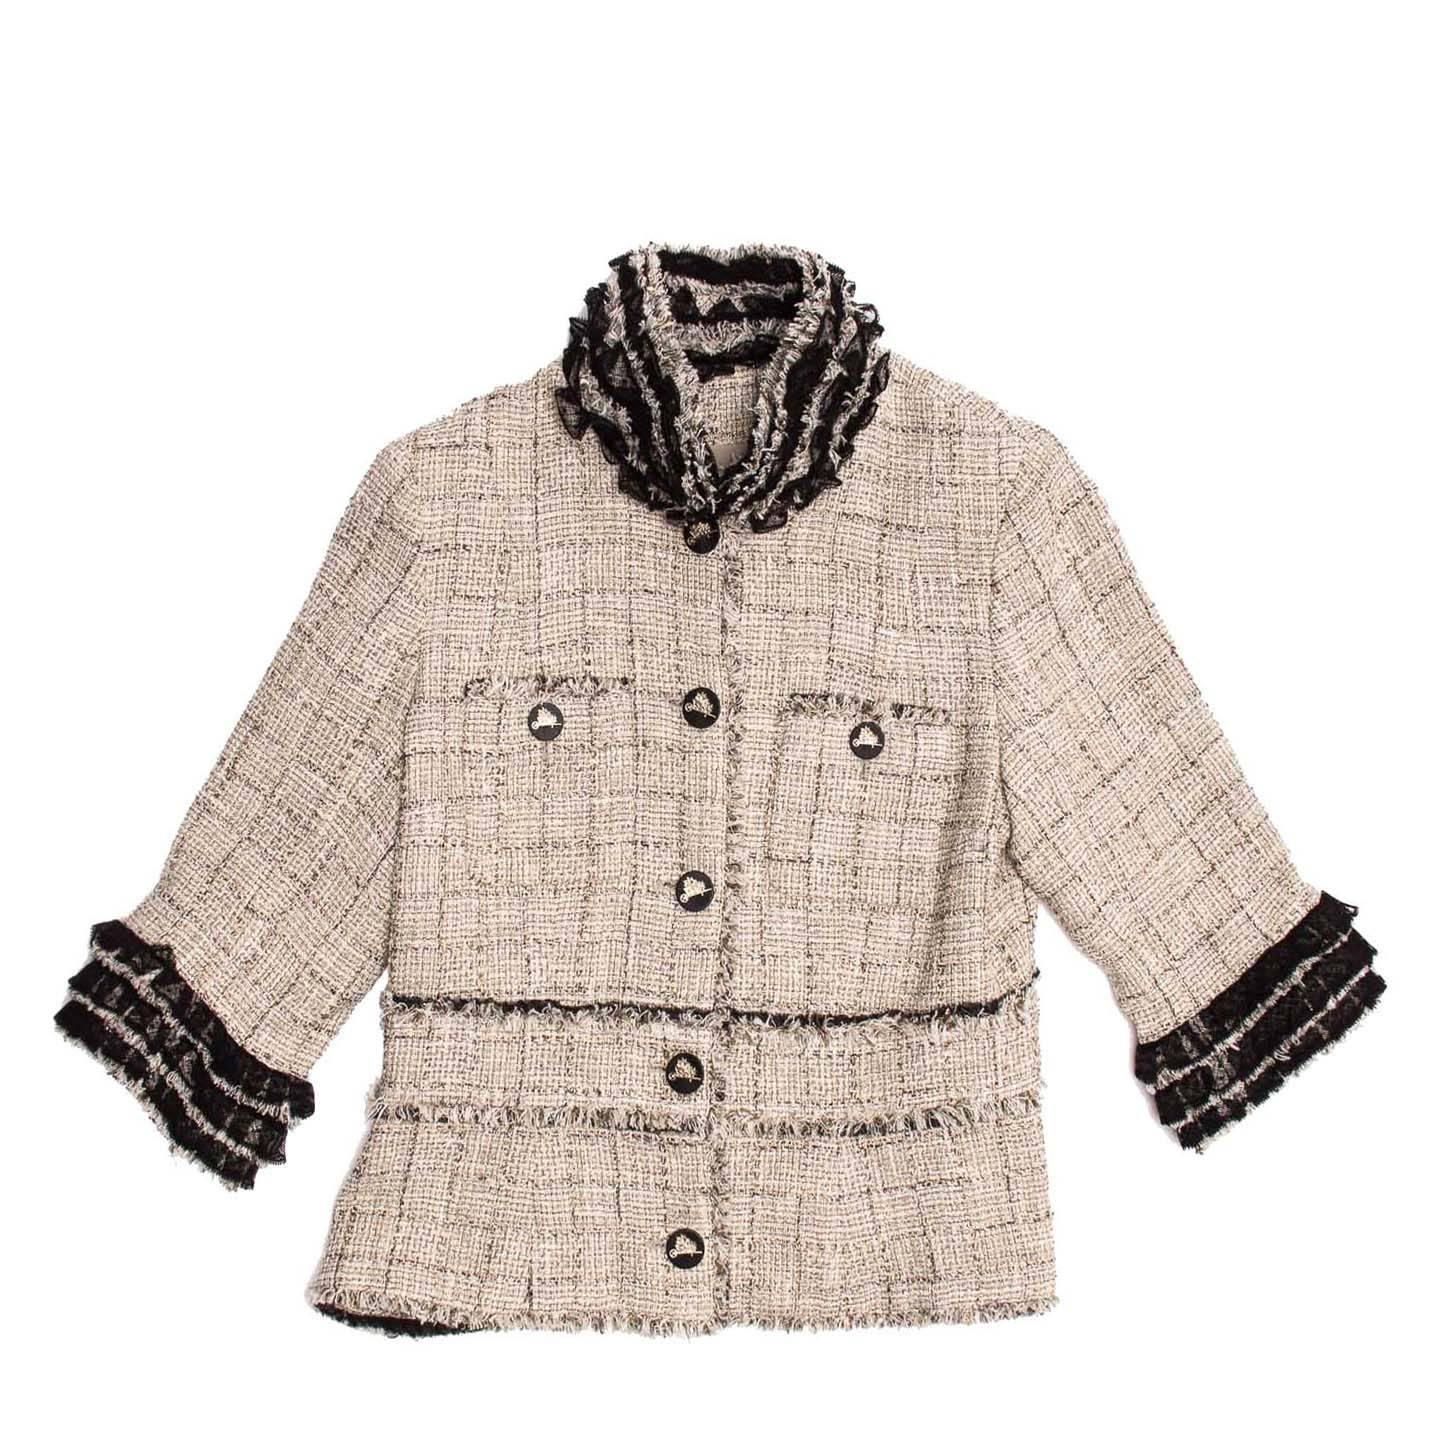 Beige cotton blend elegant 3/4 sleeves jacket with gold and silver threads. Black lace ruffles and fringing enriches the cuffs, collar and jacket body. The neck of the jacket can be transformed into a simpler round one by removing the top two